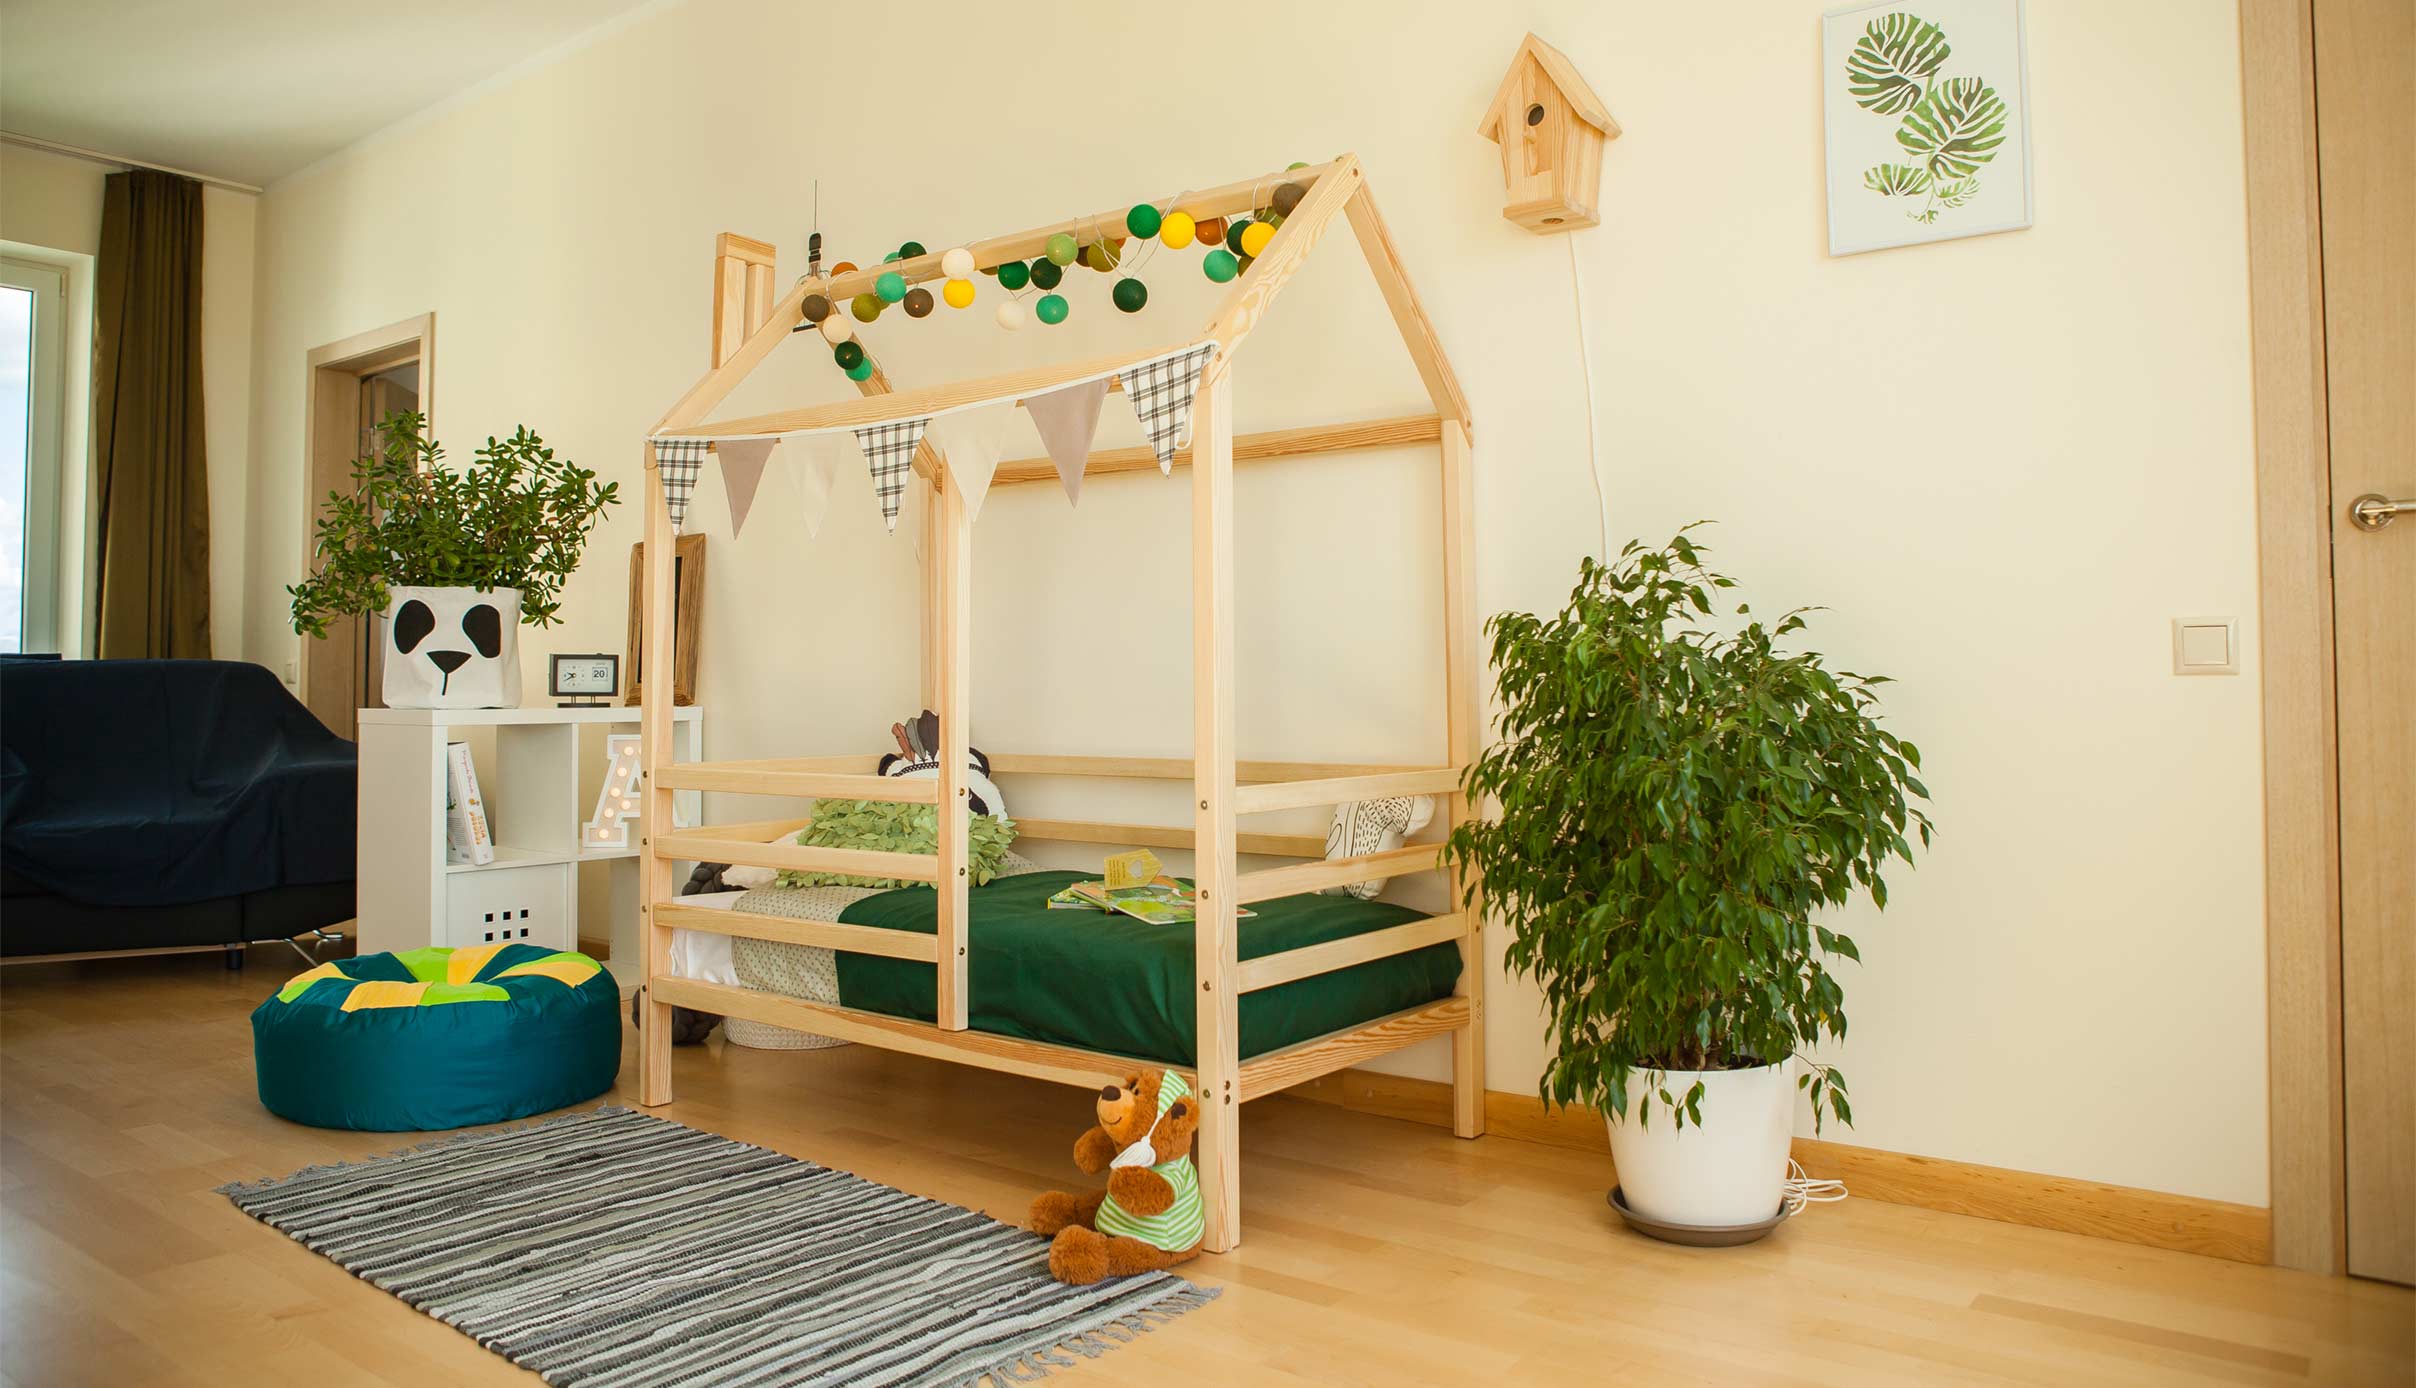 A child's room with a wooden bed and green plants.